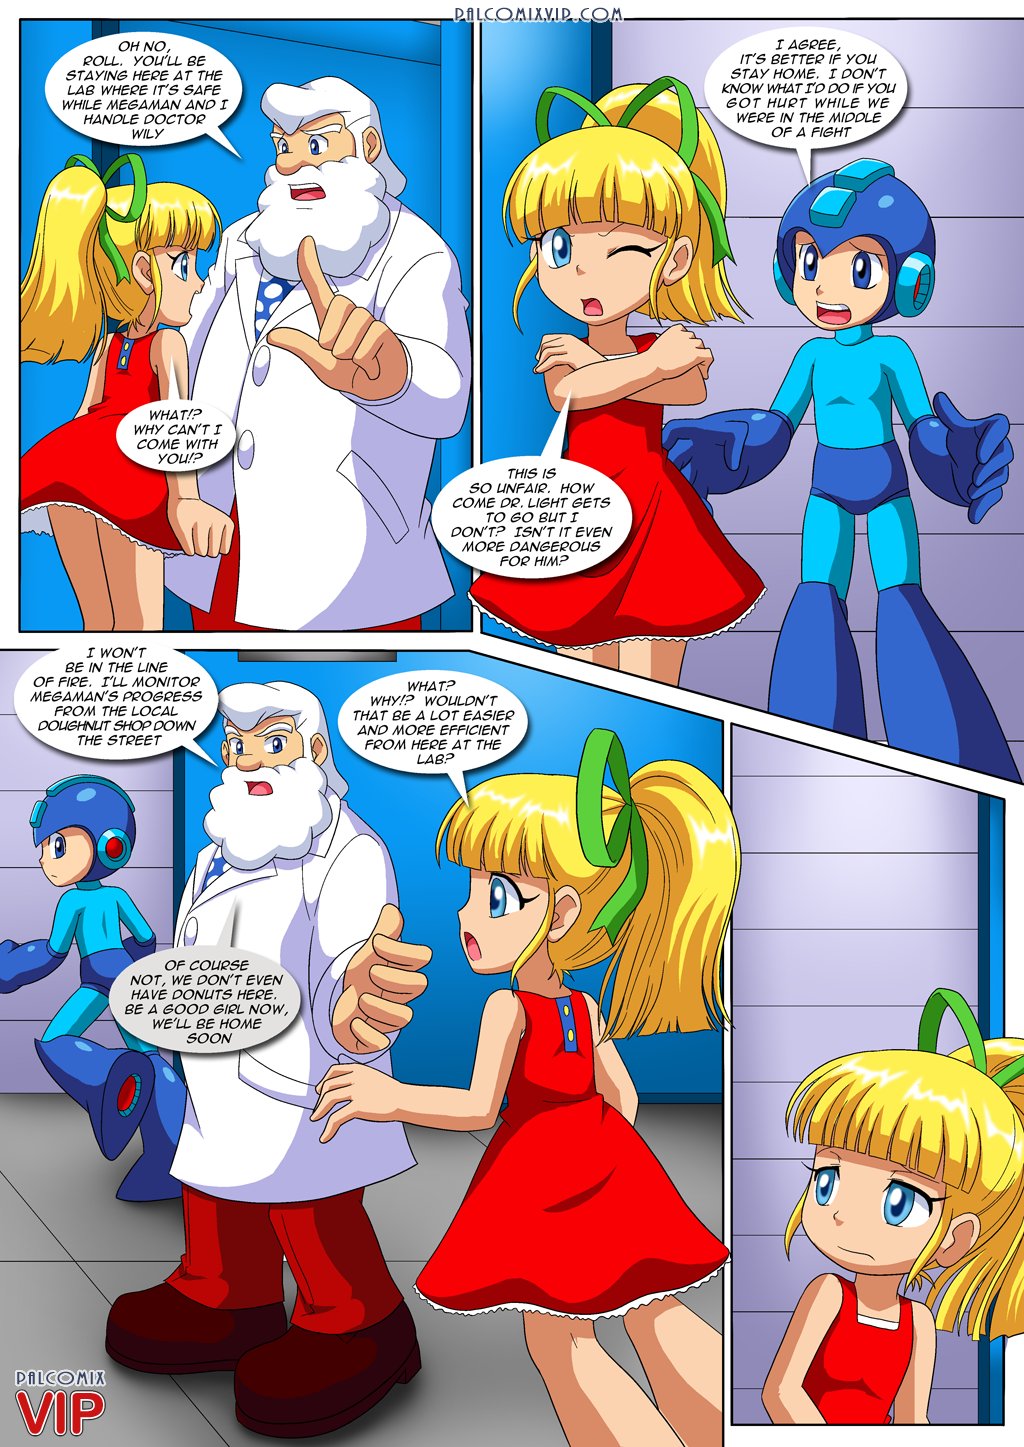 Roll xxx megaman porn - Real Naked Girls